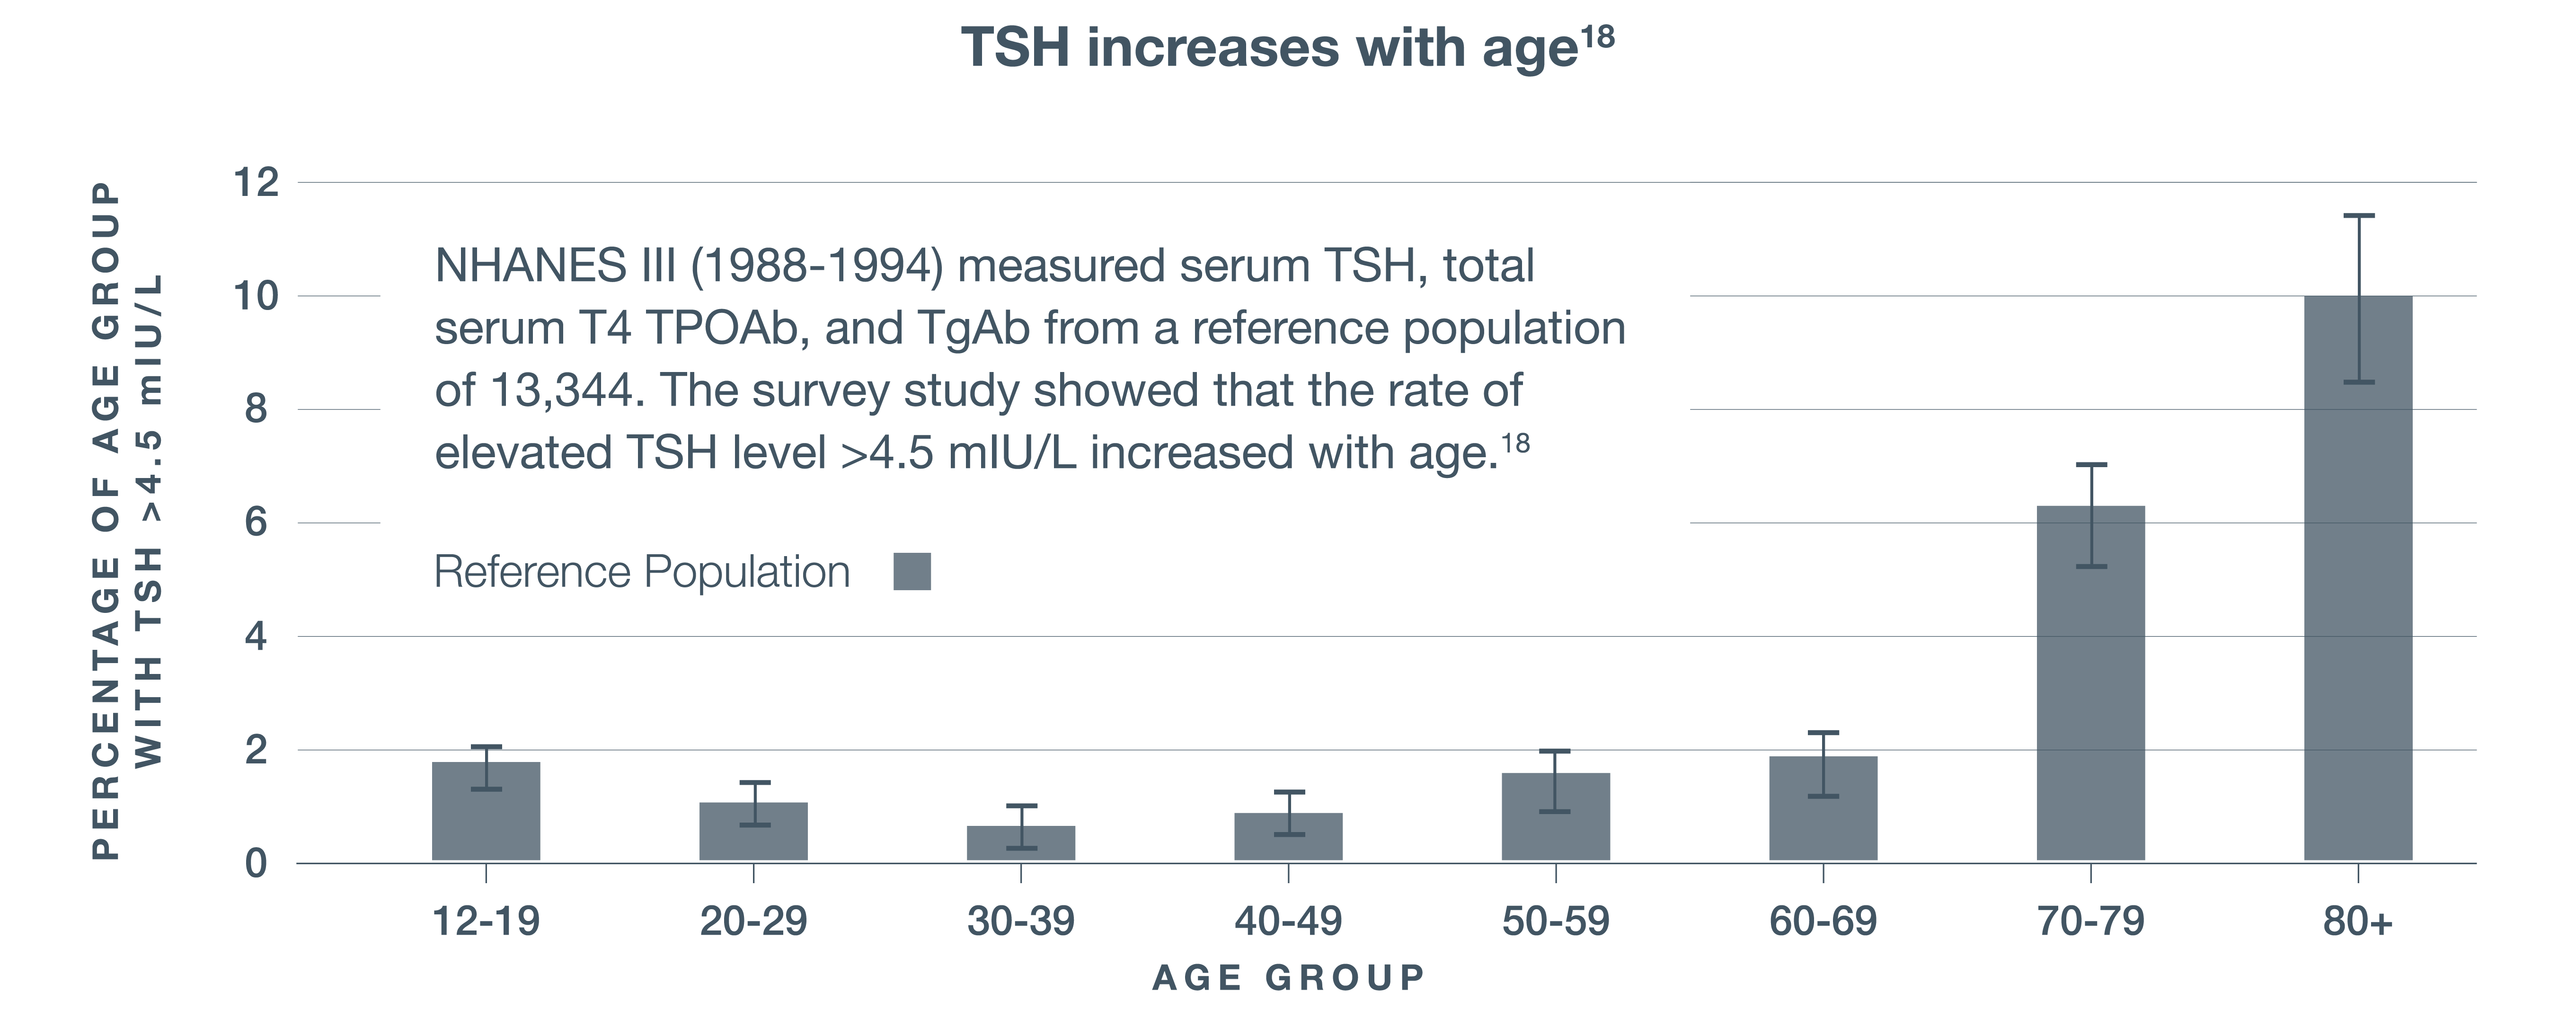 NHANES III; TSH increases with age